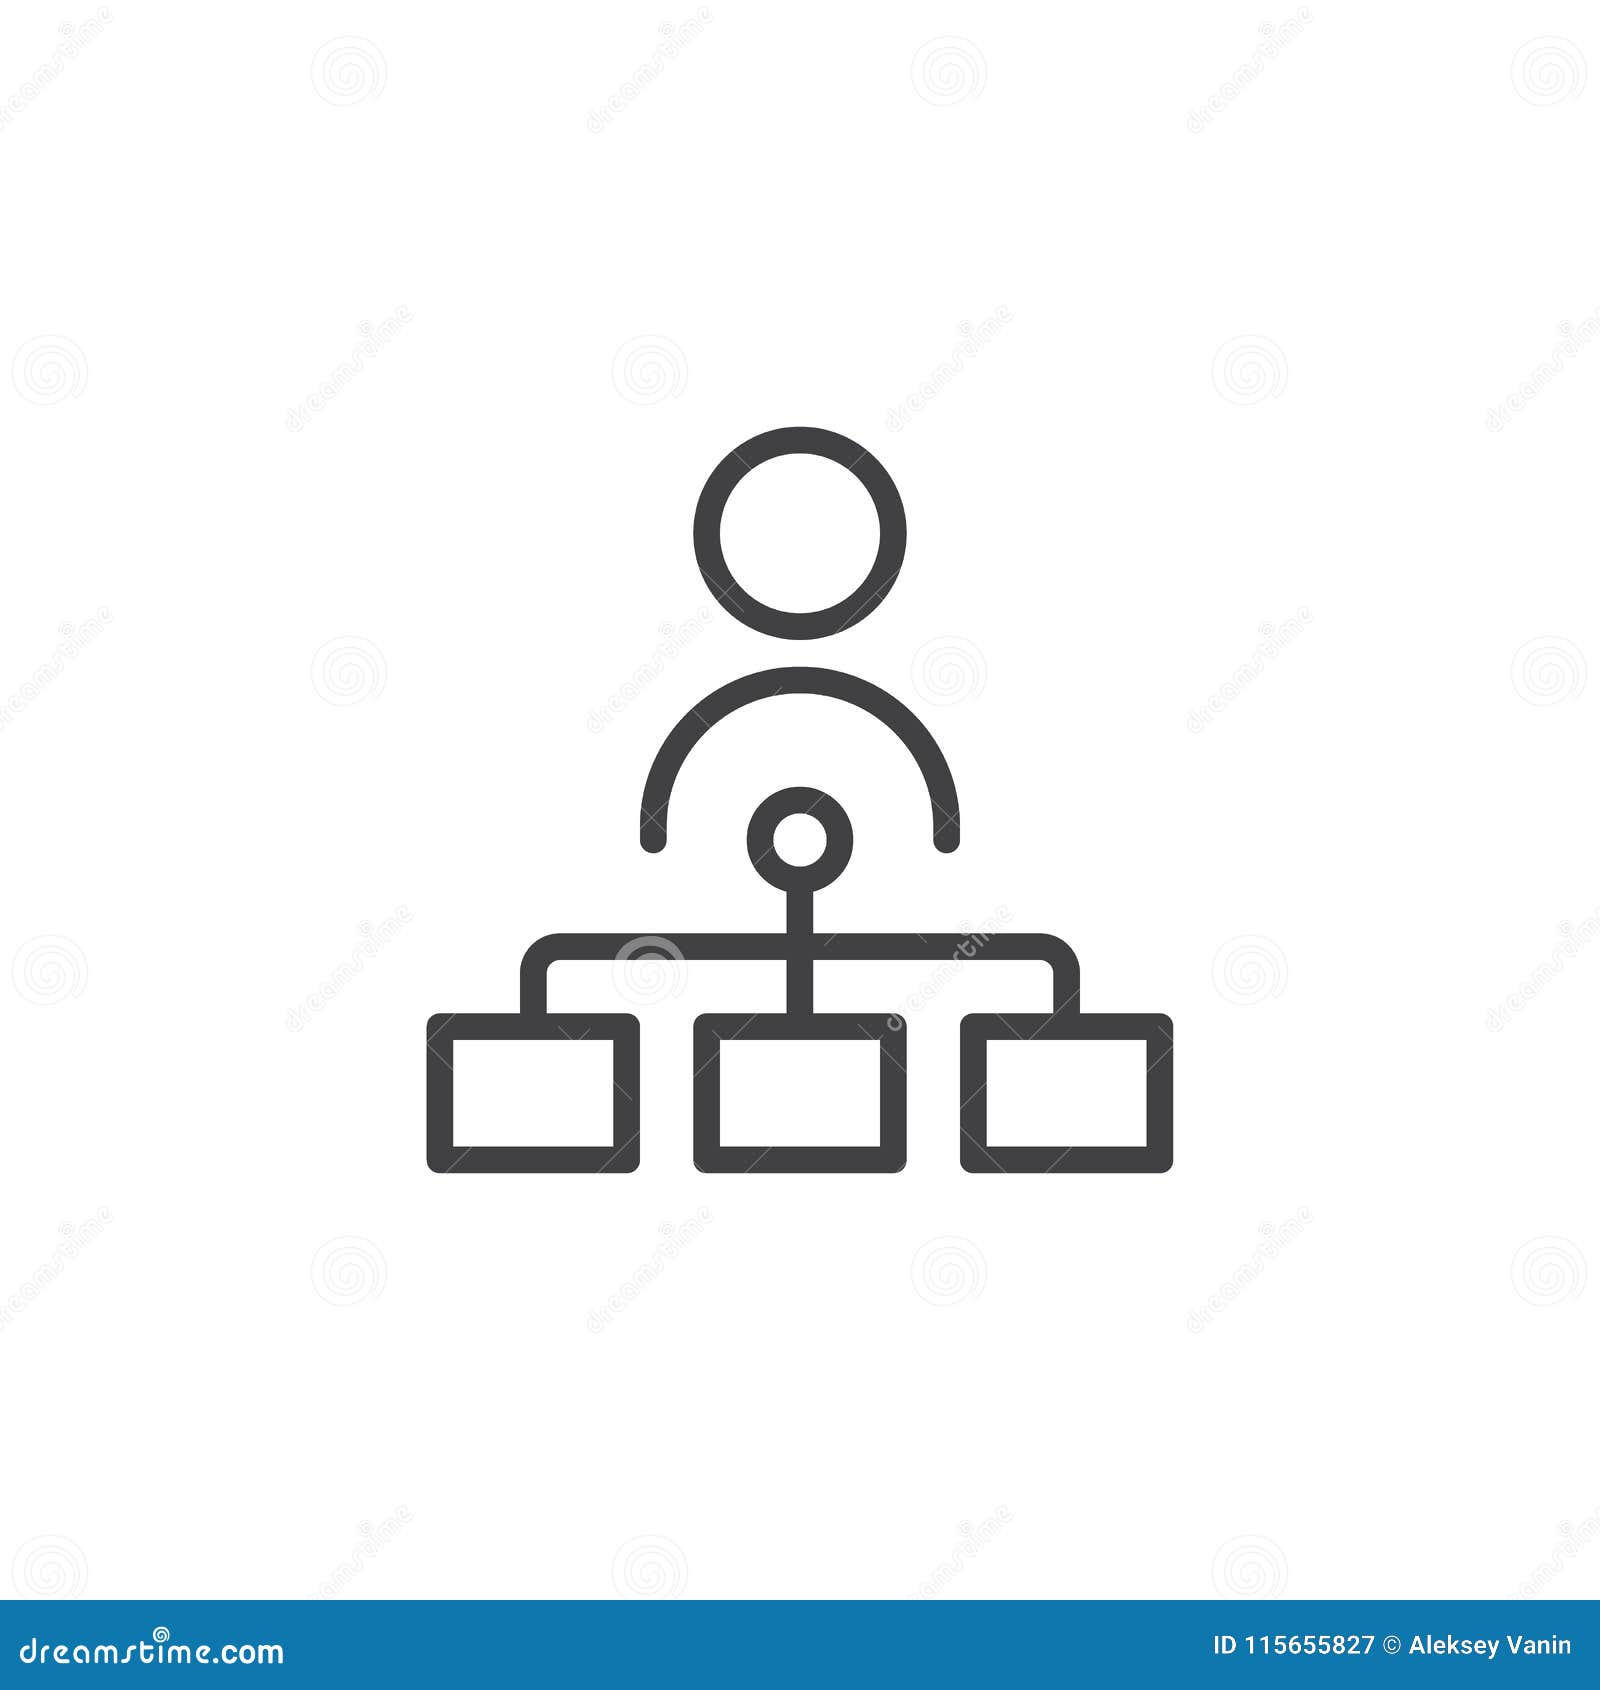 Premium Vector  Organizational chart line icon outline hierarchy